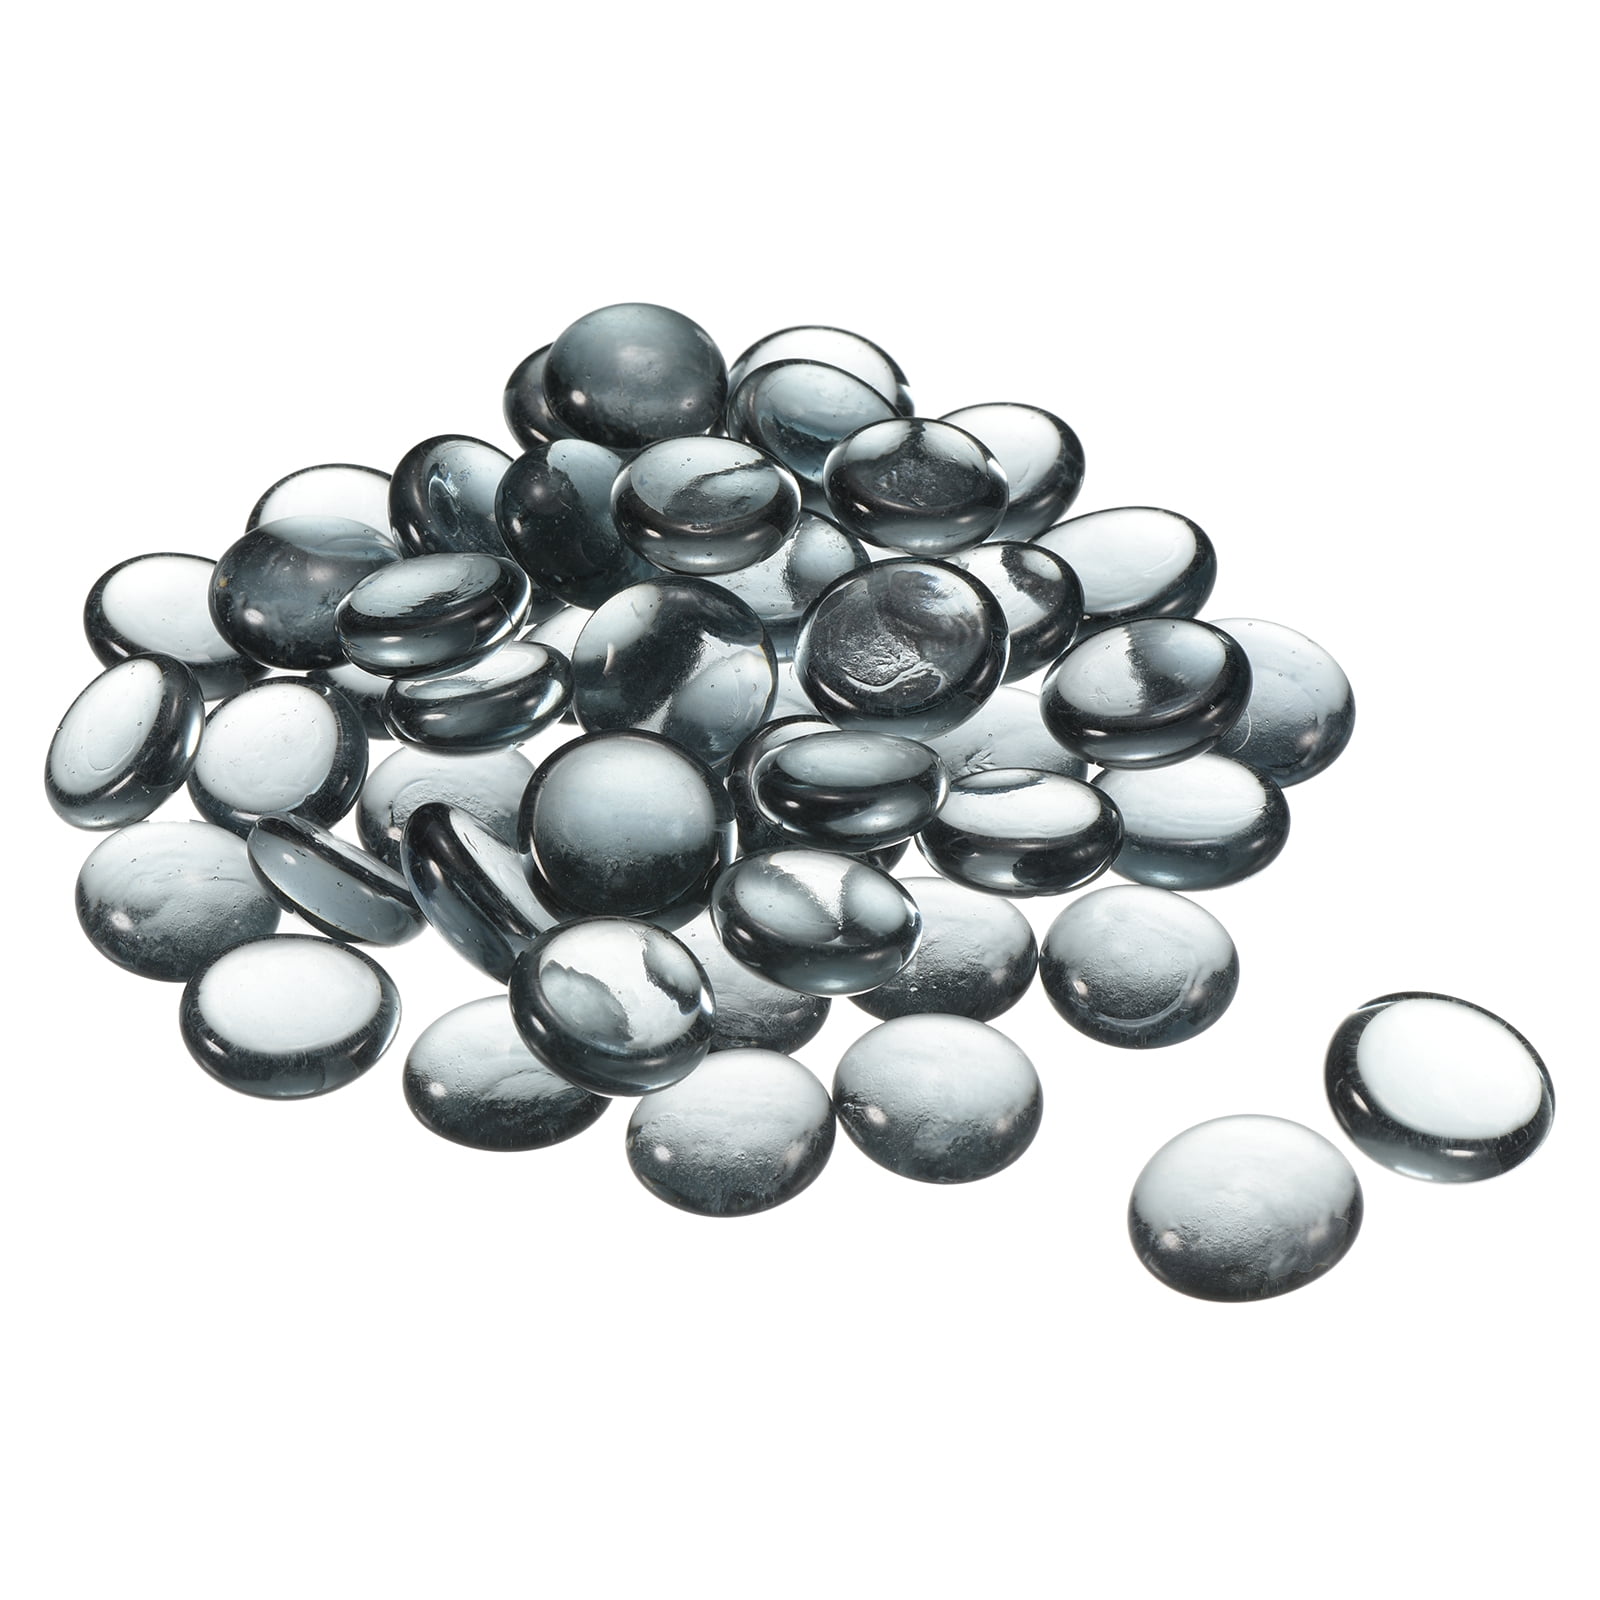 Uxcell Decorative Flat Glass Marbles 17-19mm Rock Vase Filler Gray